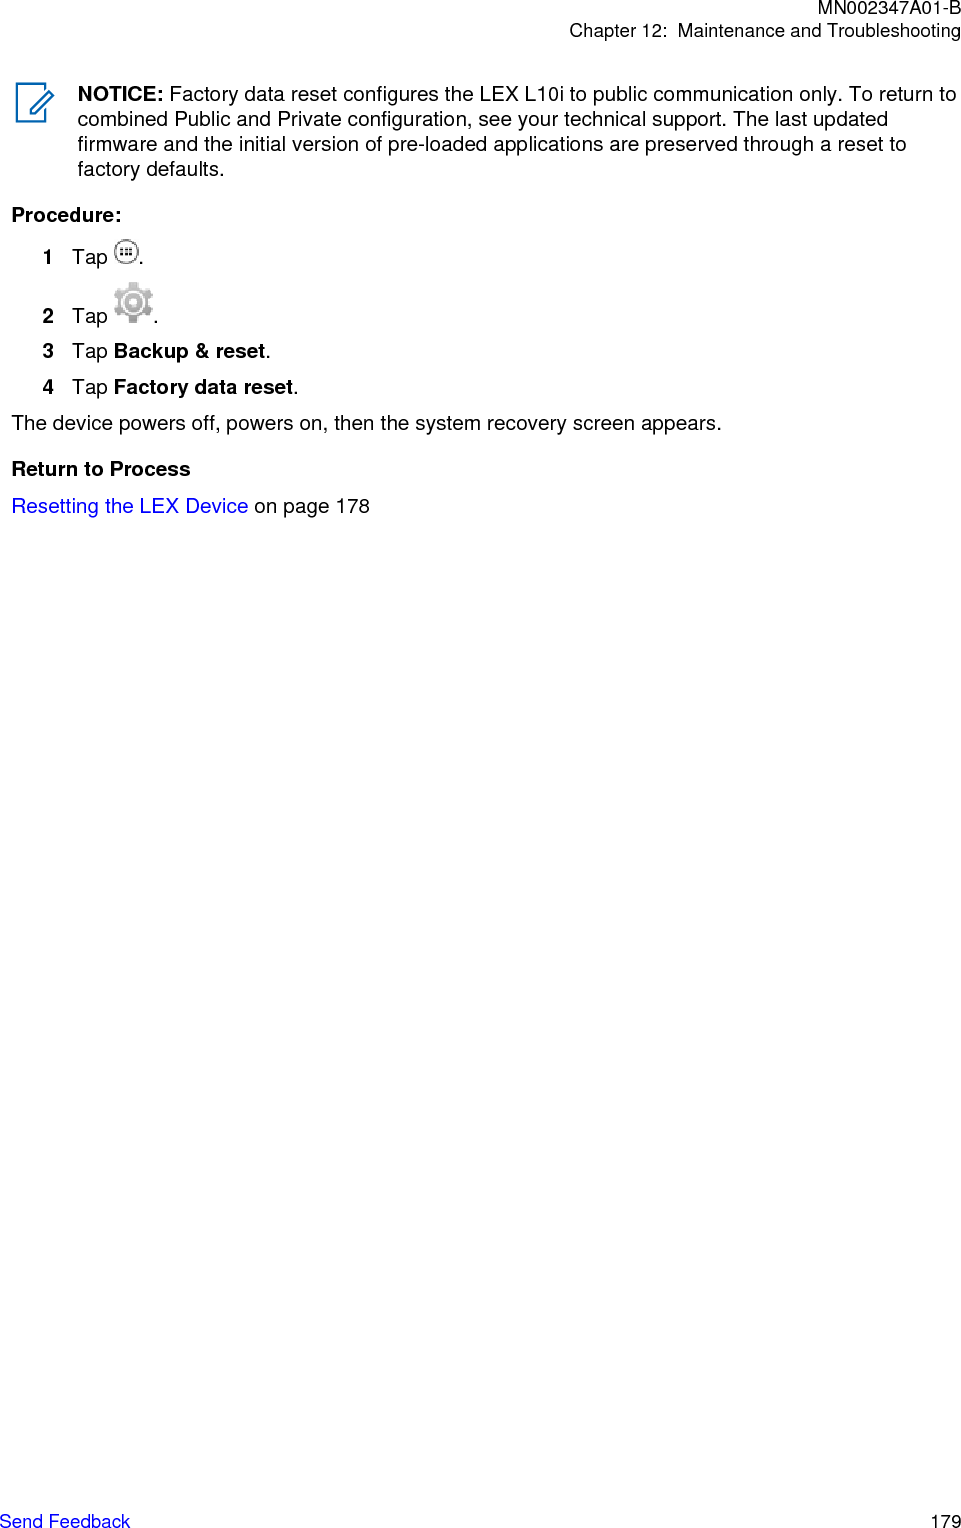 This page intentionally left blank.